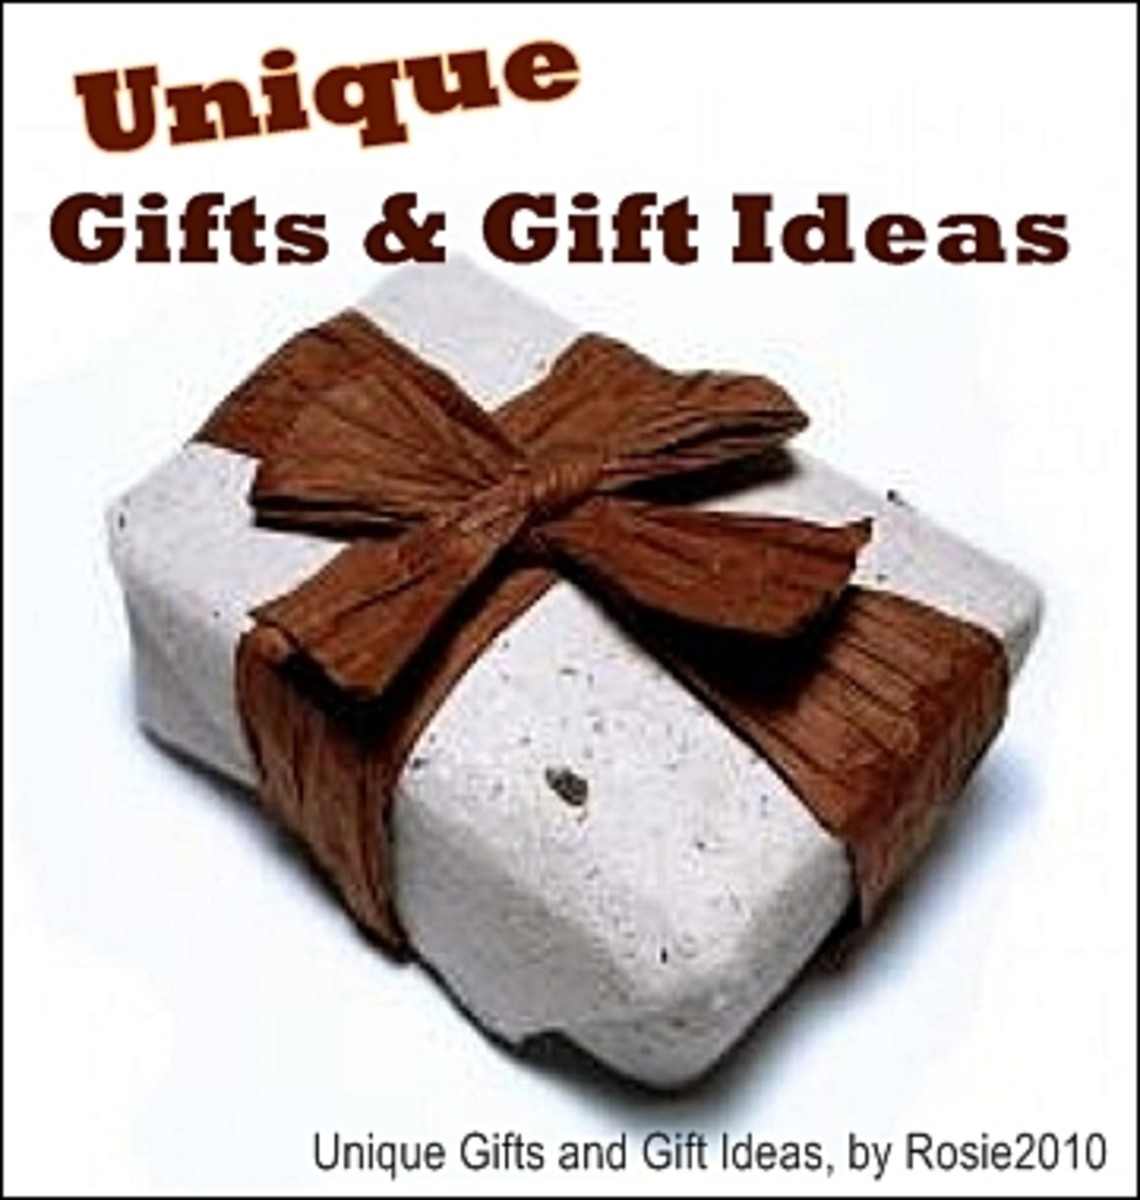 Unique Gifts and Gift Ideas for under $100